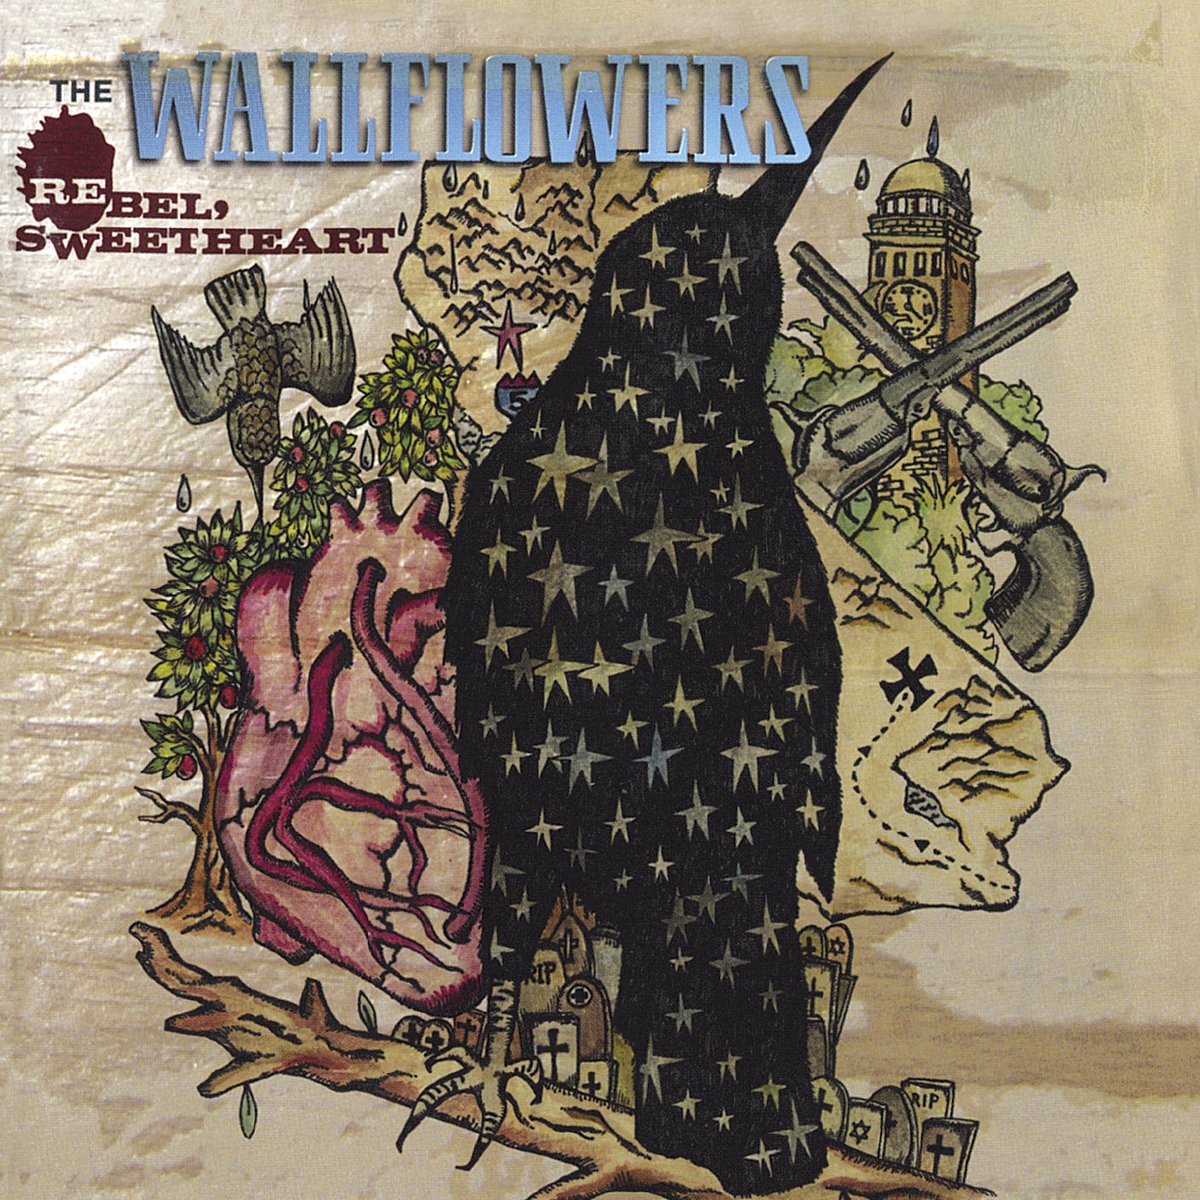 On this day in 2005, @TheWallflowers released their fifth studio album, Rebel Sweetheart on @Interscope Featuring the singles The Beautiful Side of Somewhere & God Says Nothing Back but my favourite was the opener Days Of Wonder.